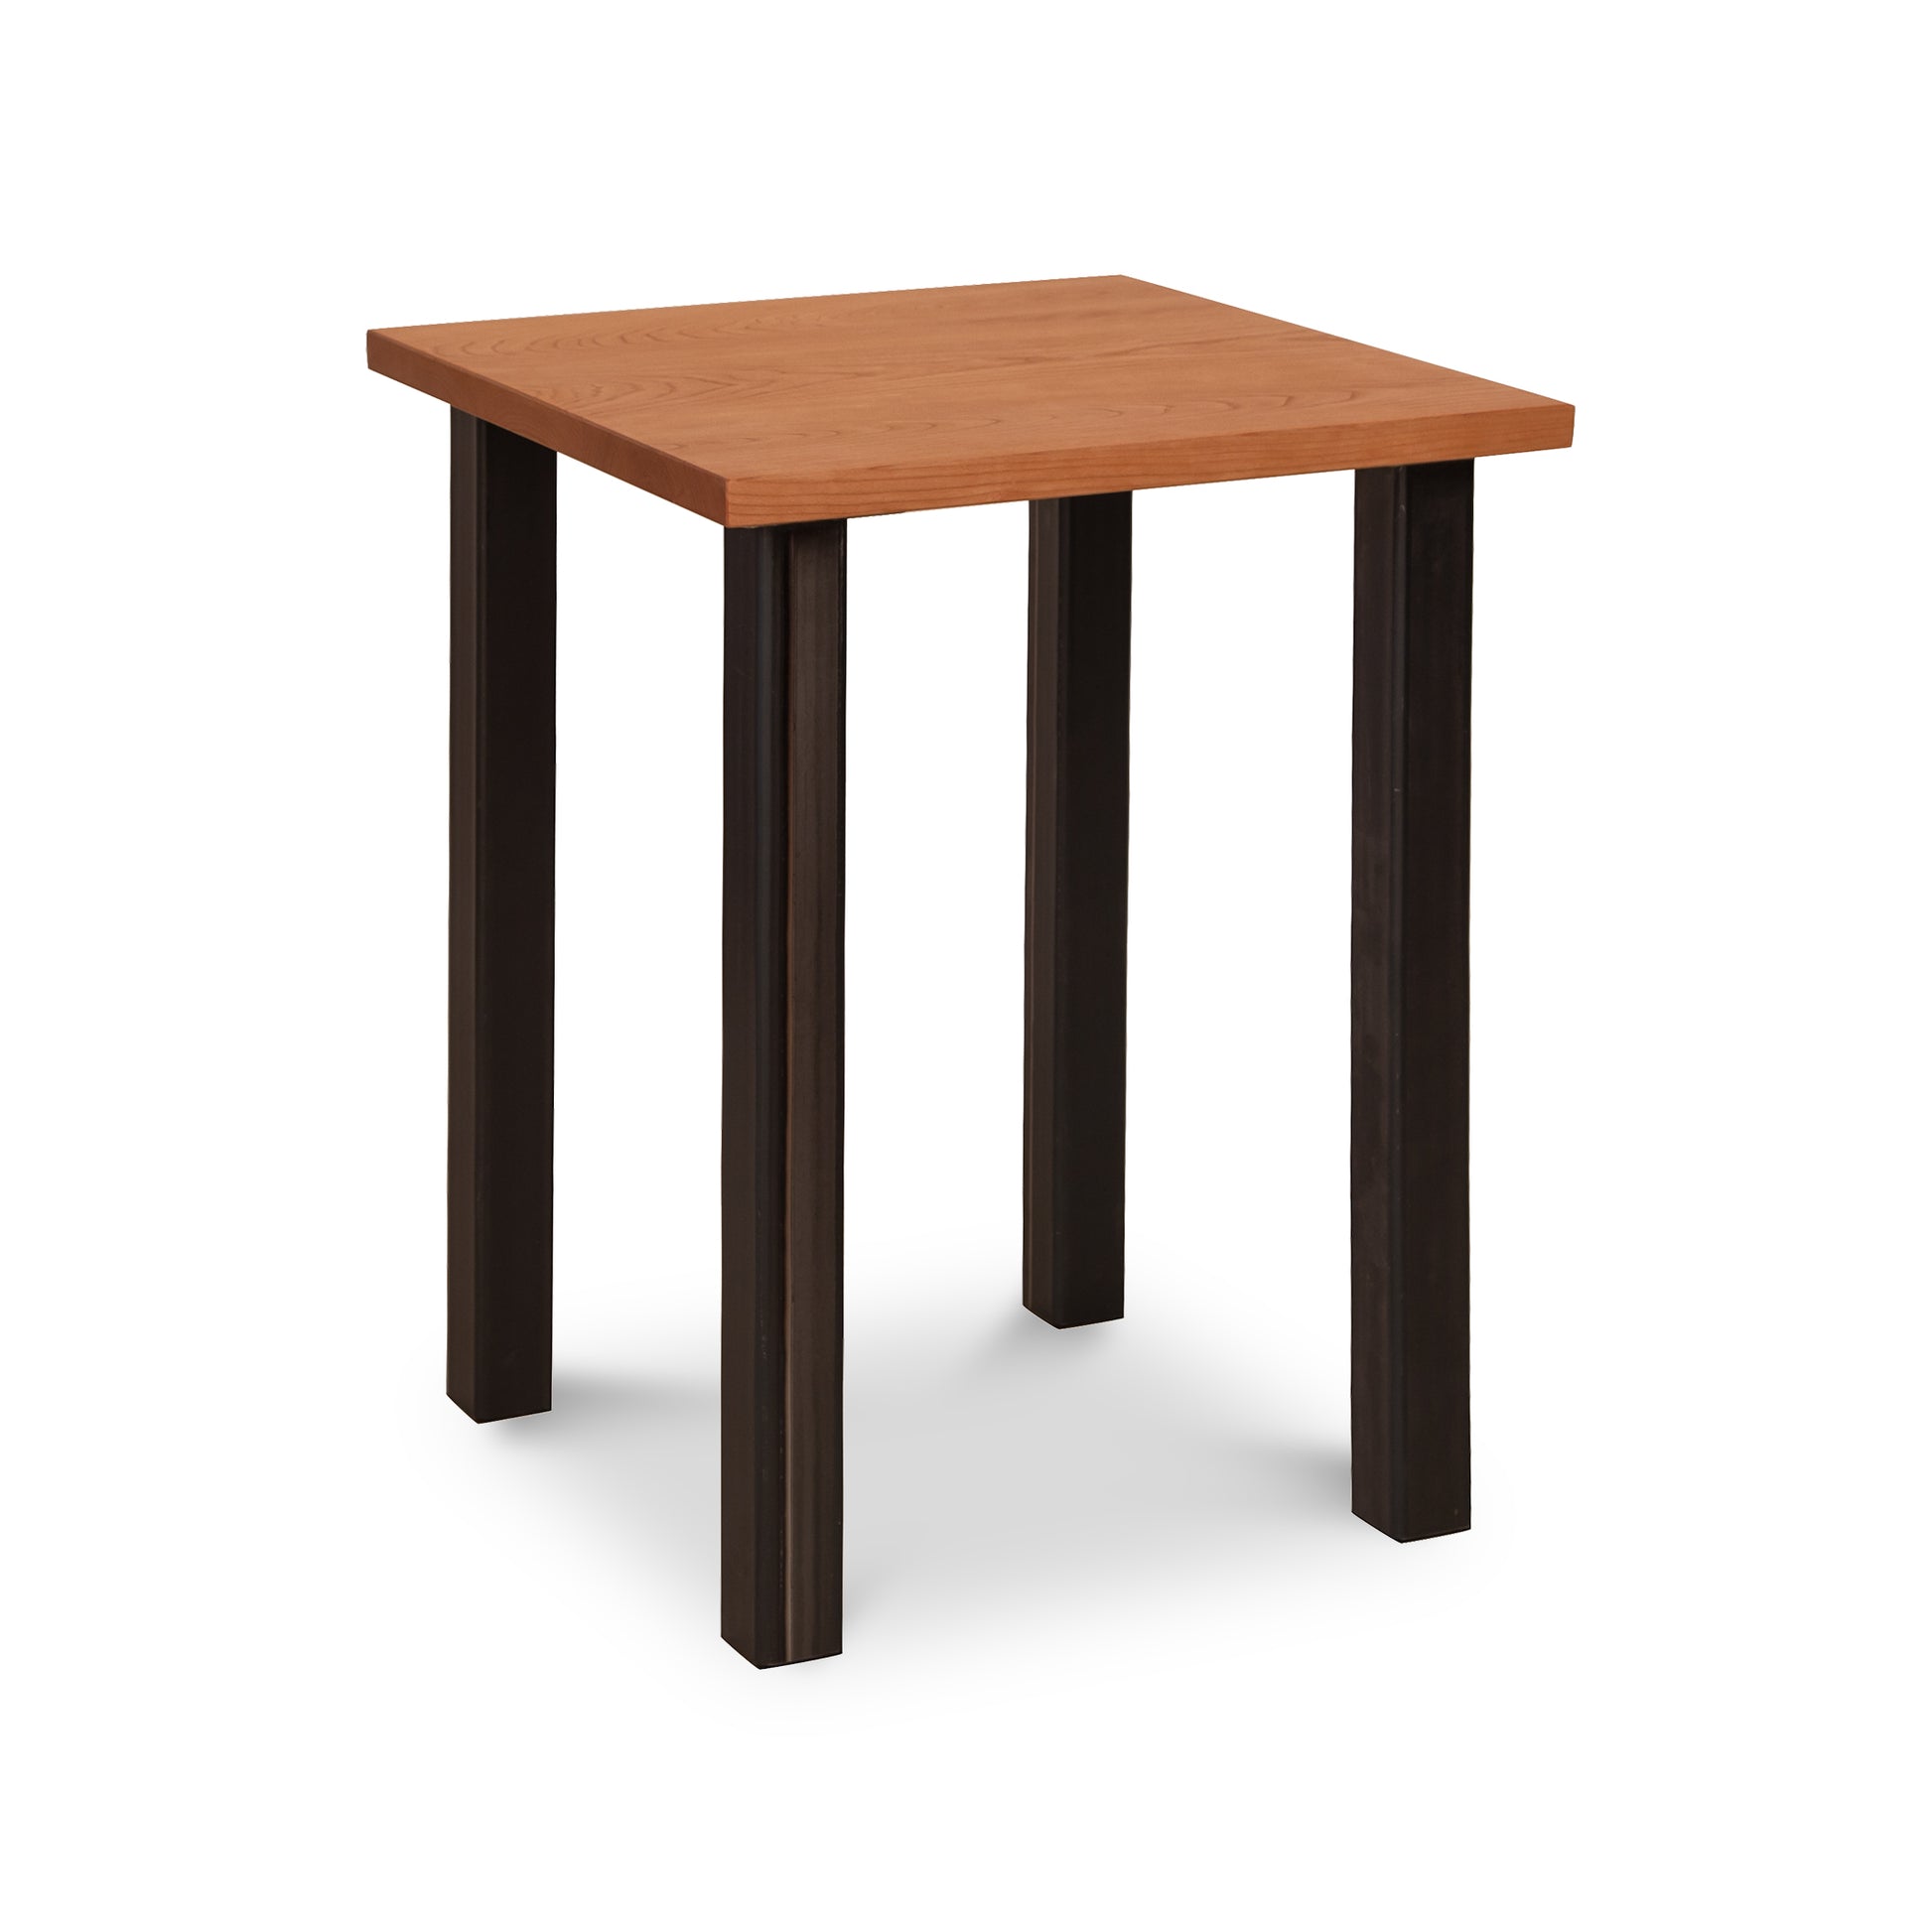 SIMPLE Square wooden table By Very Wood